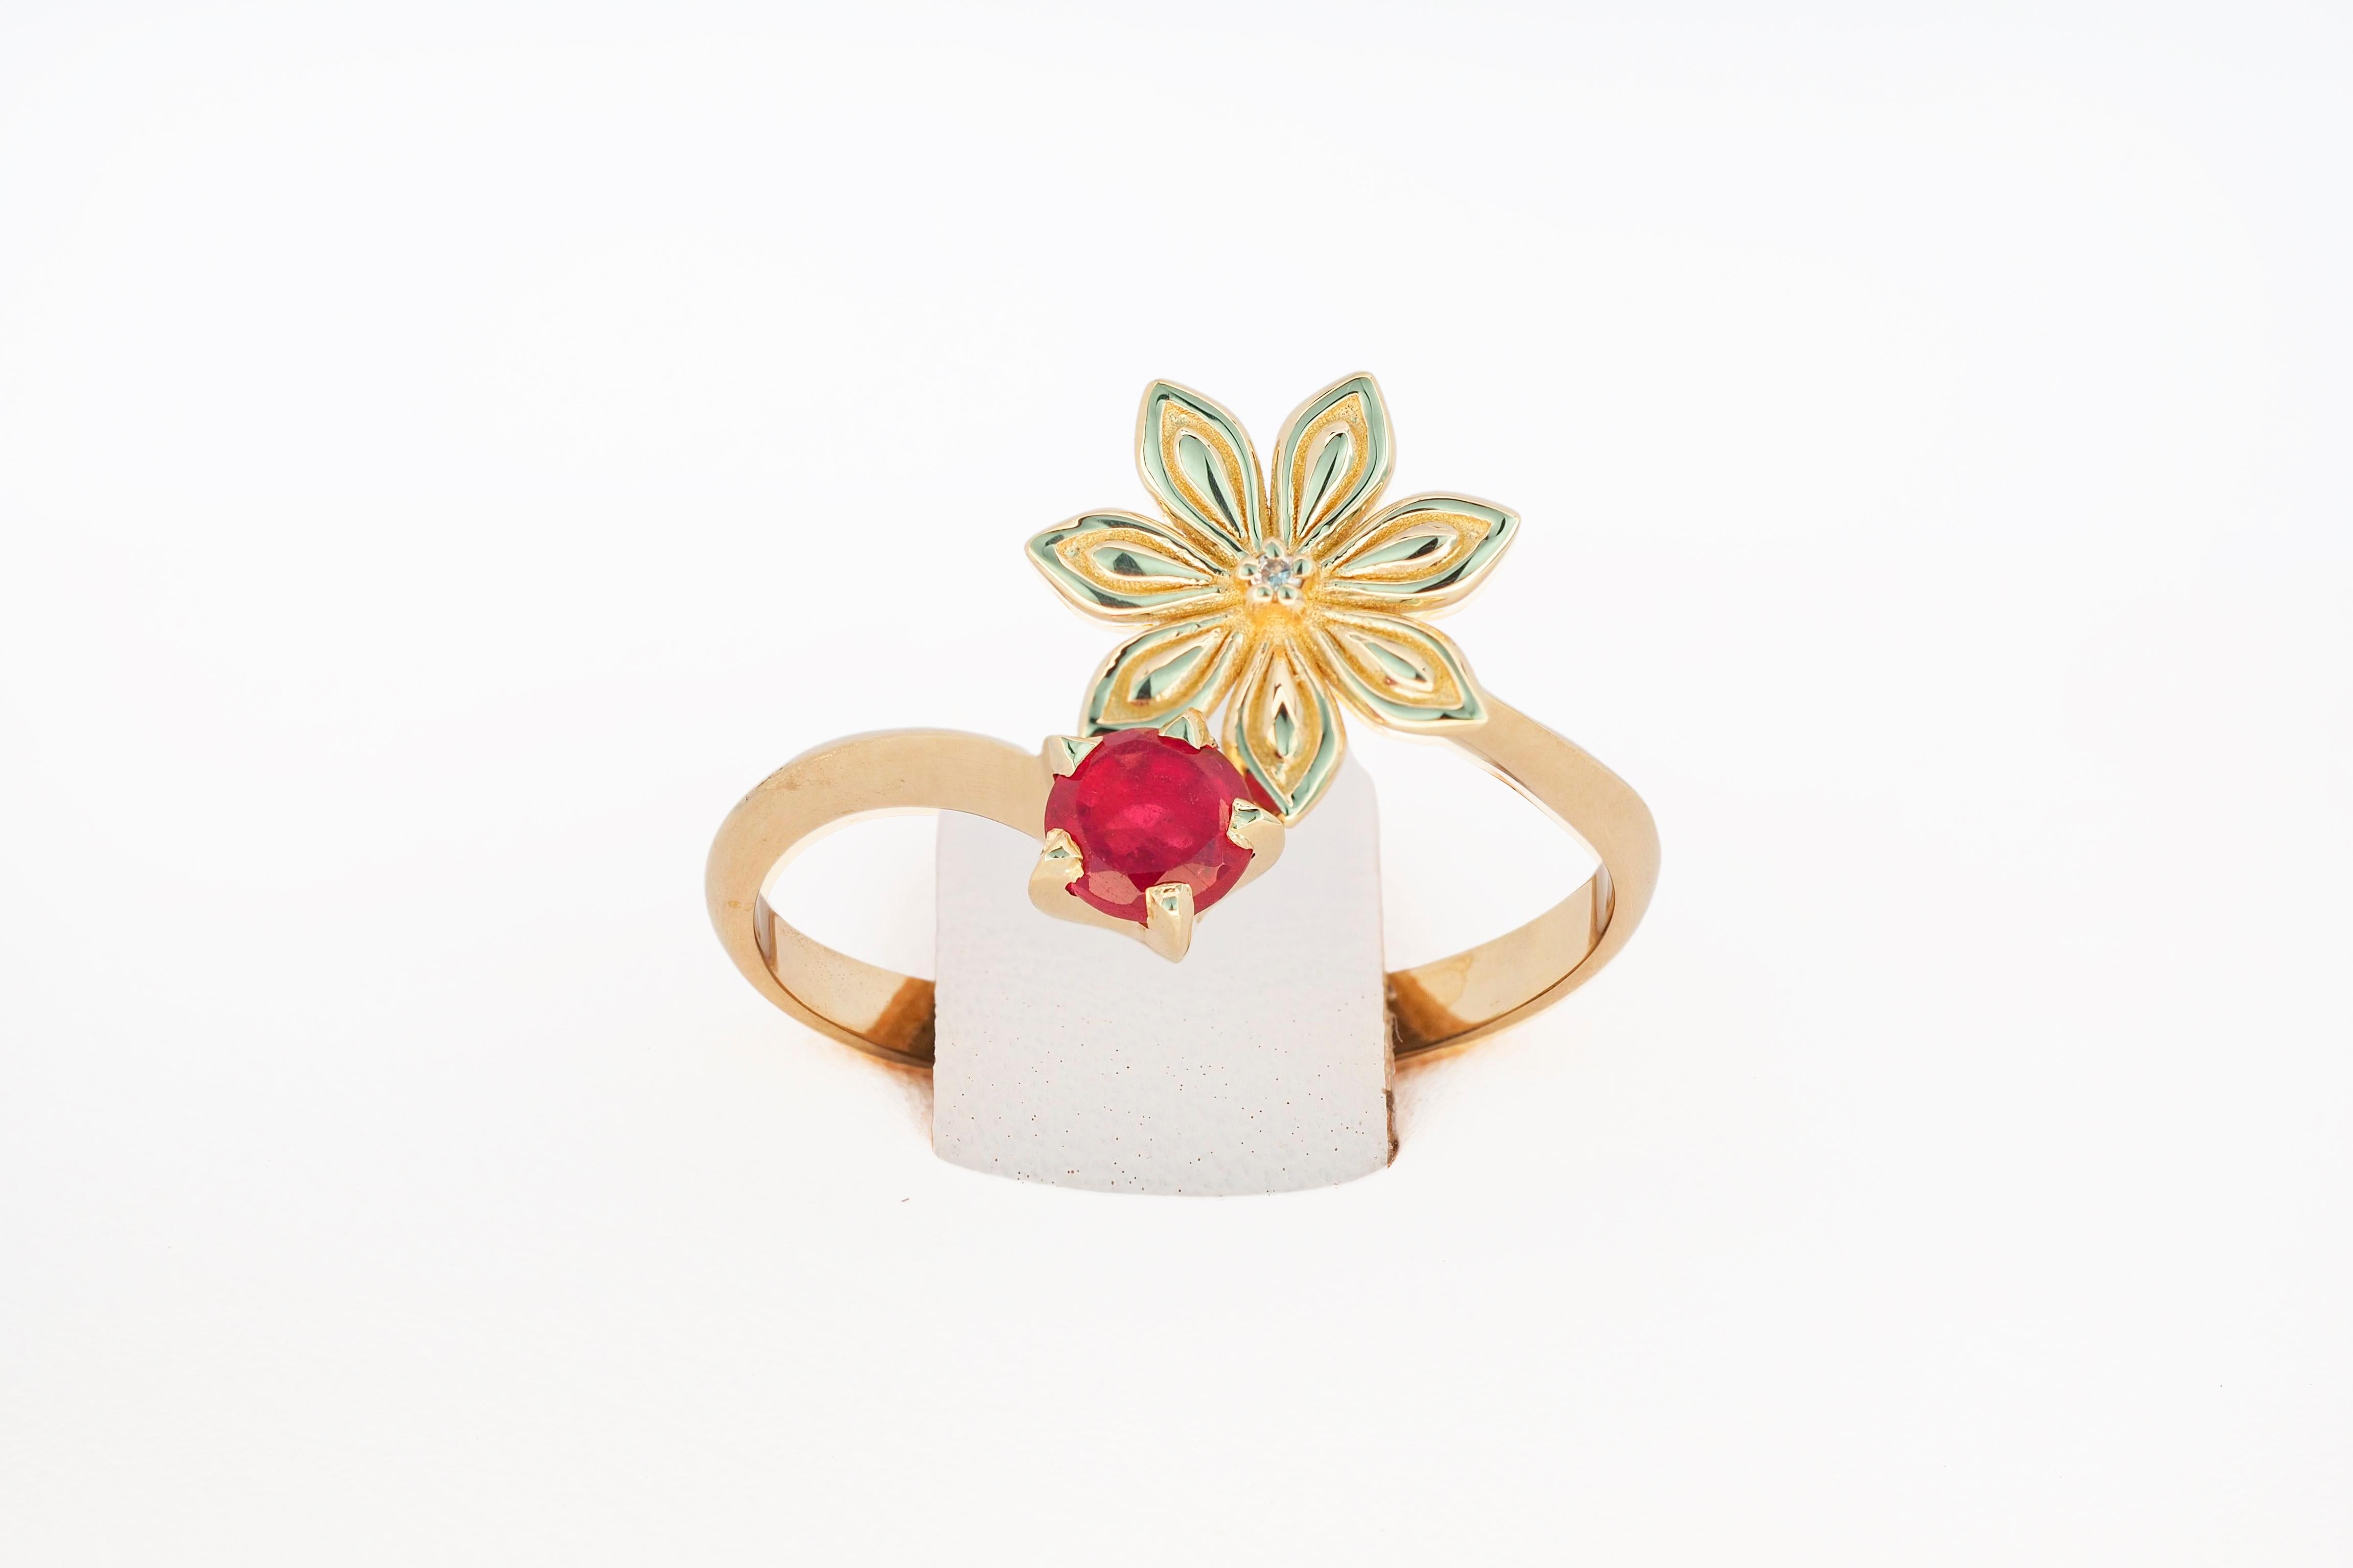 For Sale:   Ruby gold ring. 14 Karat Gold Star Anise Flower Ring. July birthstone ruby ring 7